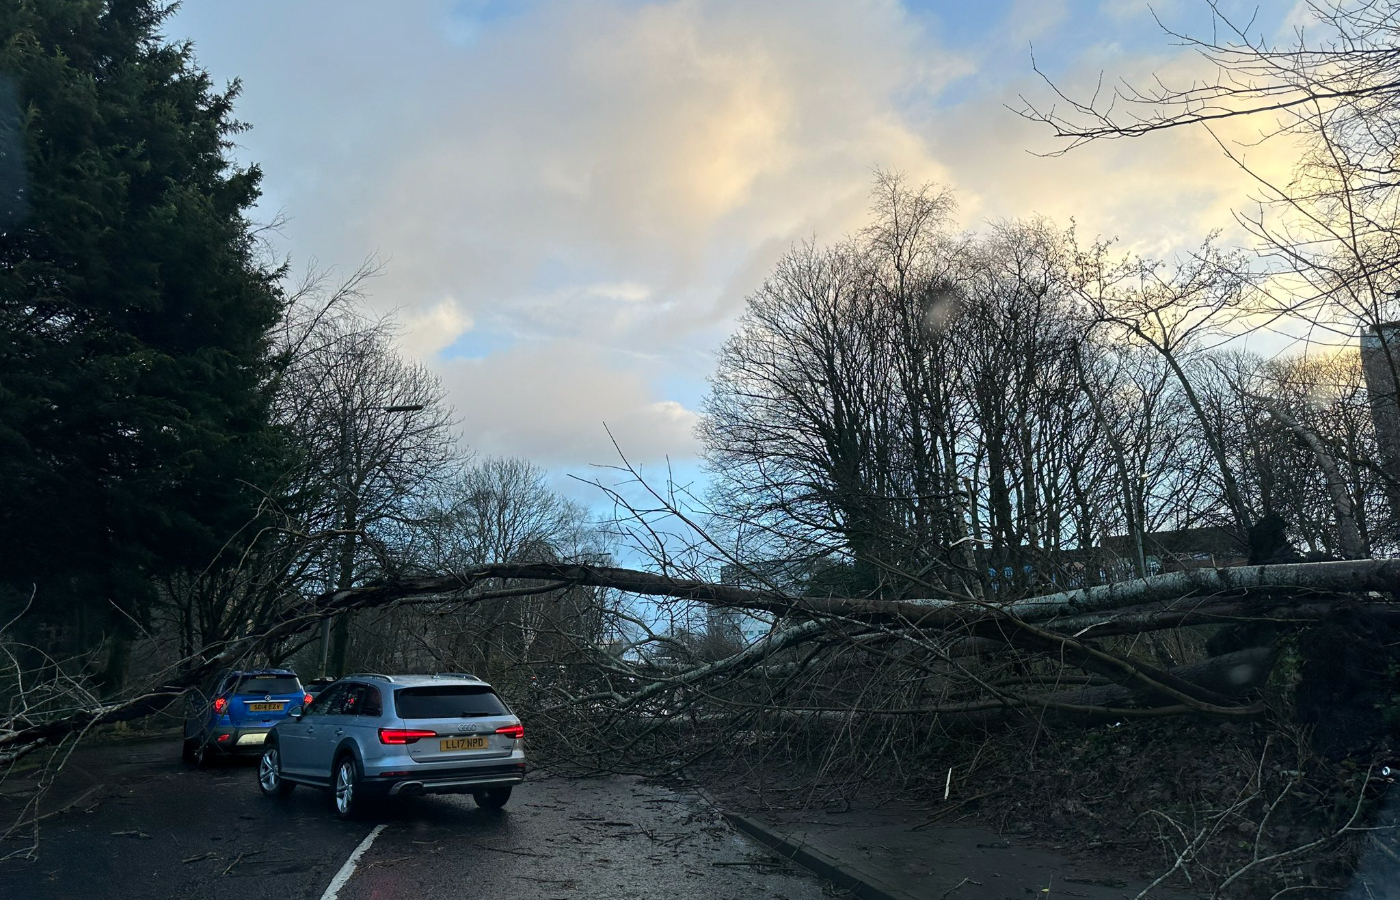 A tree fallen on to the road caused disruption for drivers in Glasgow. Photo: Abdul Bostani.